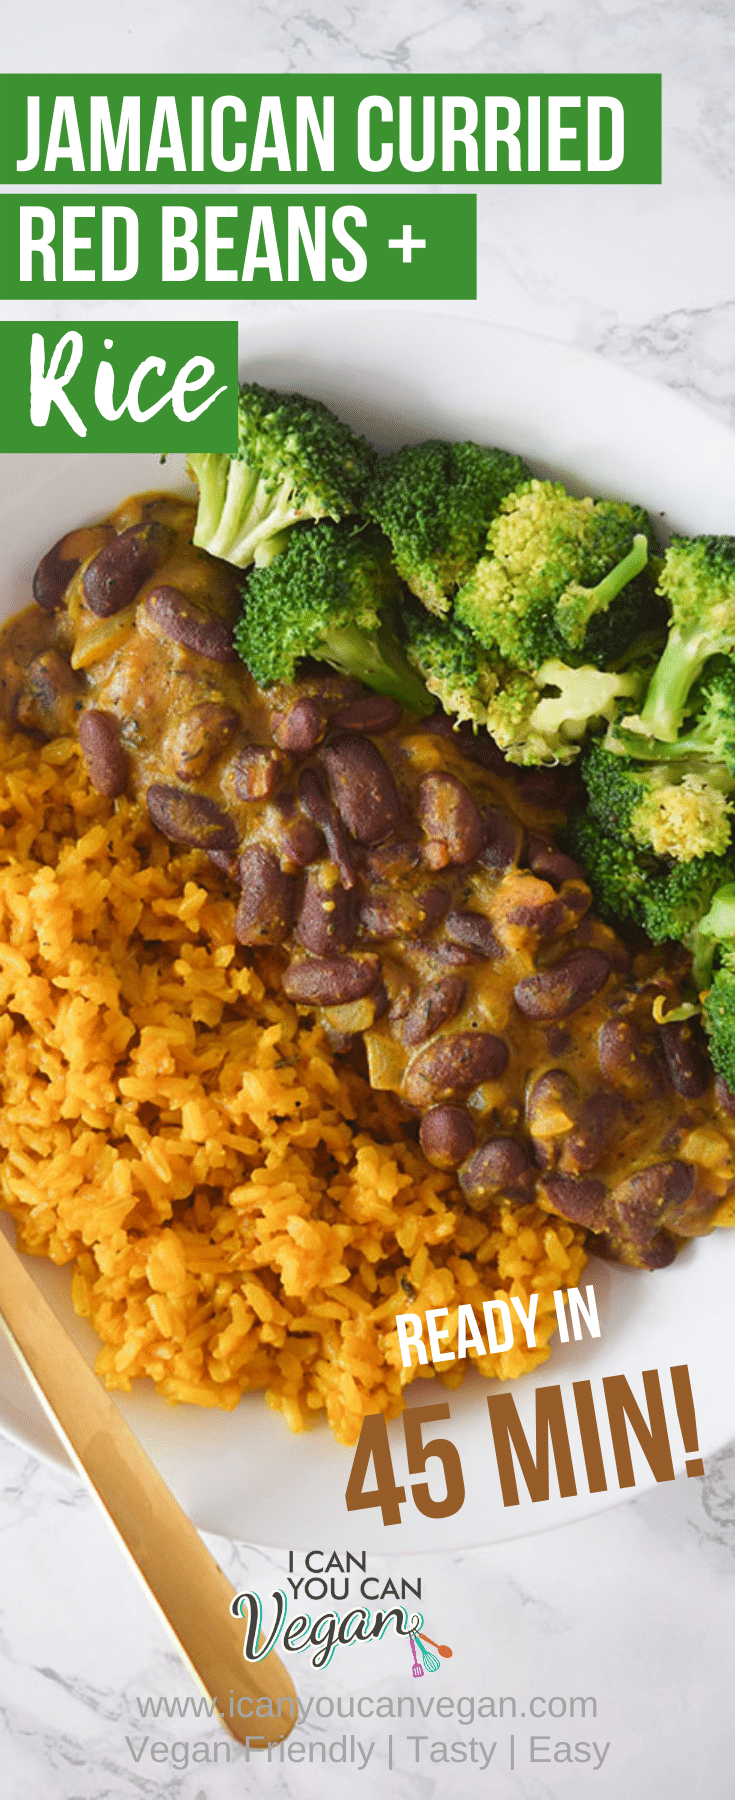 Curried Red Beans